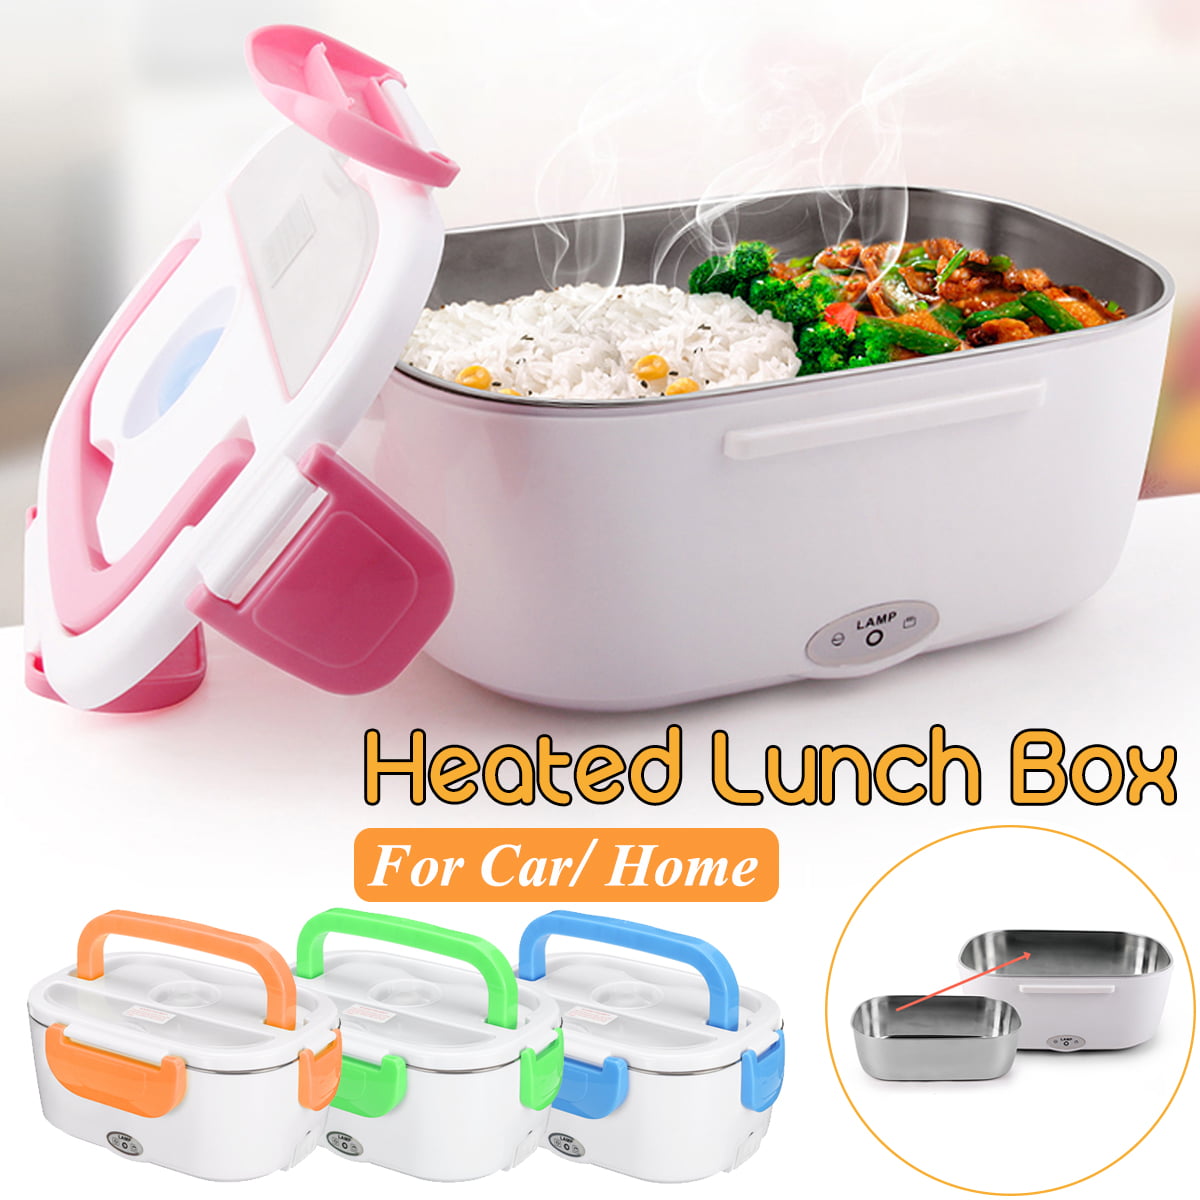 New Electric Heating Lunch Box Portable Dinner Meal Heater Food Container Warmer 